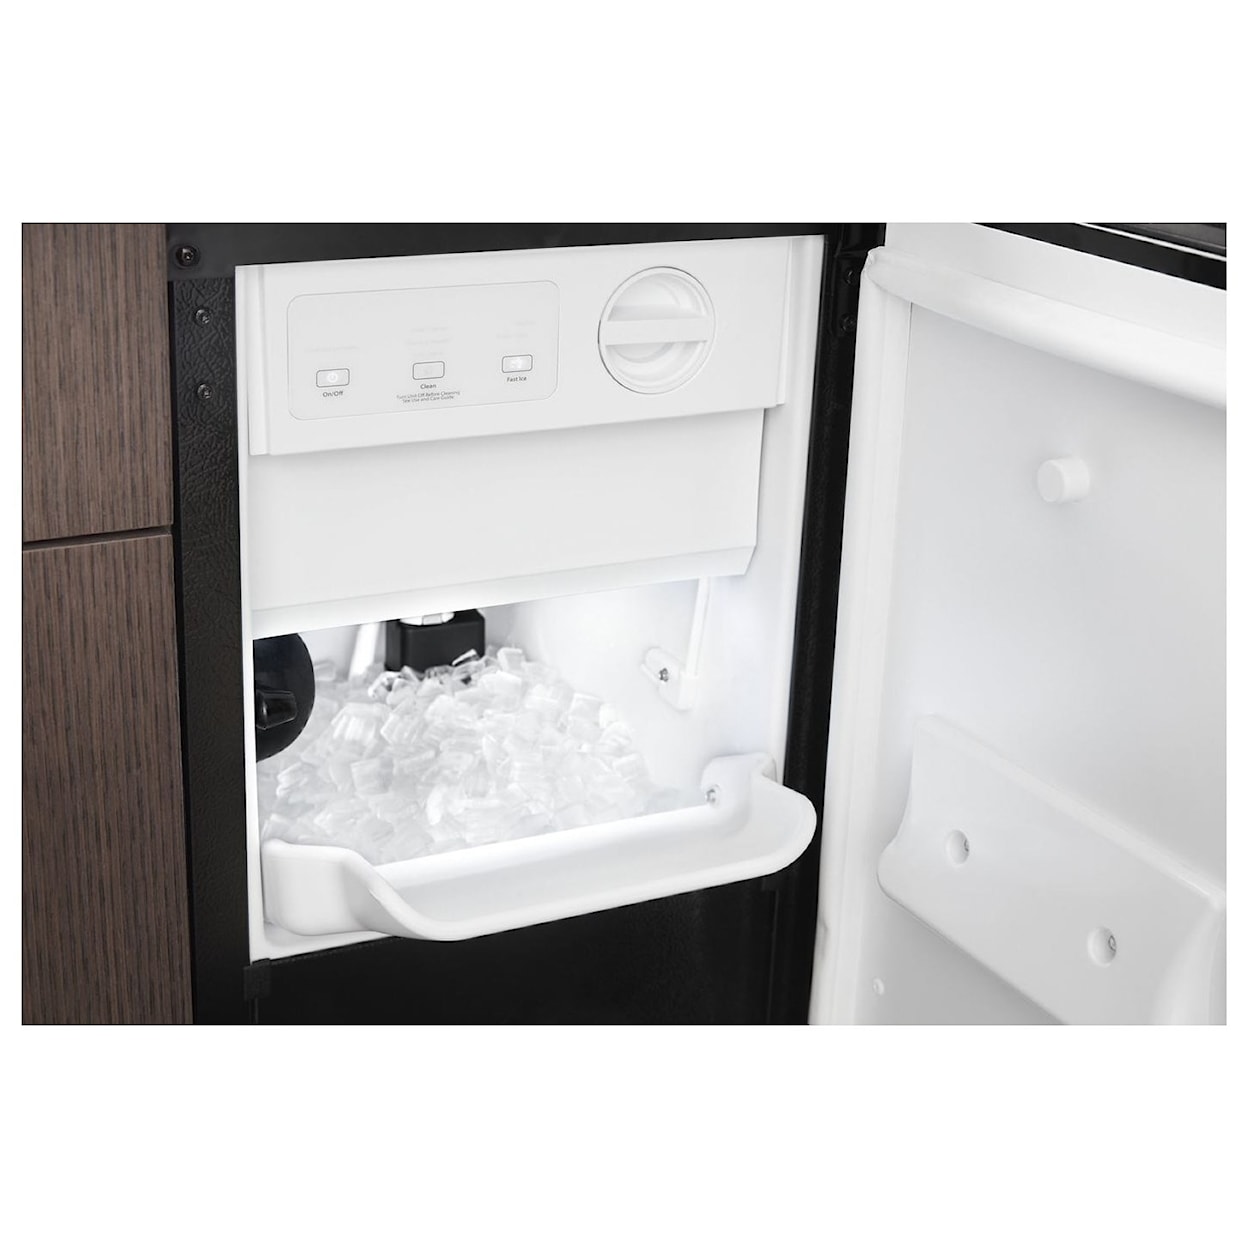 Whirlpool Ice Maker 15-inch Icemaker with Clear Ice Technology